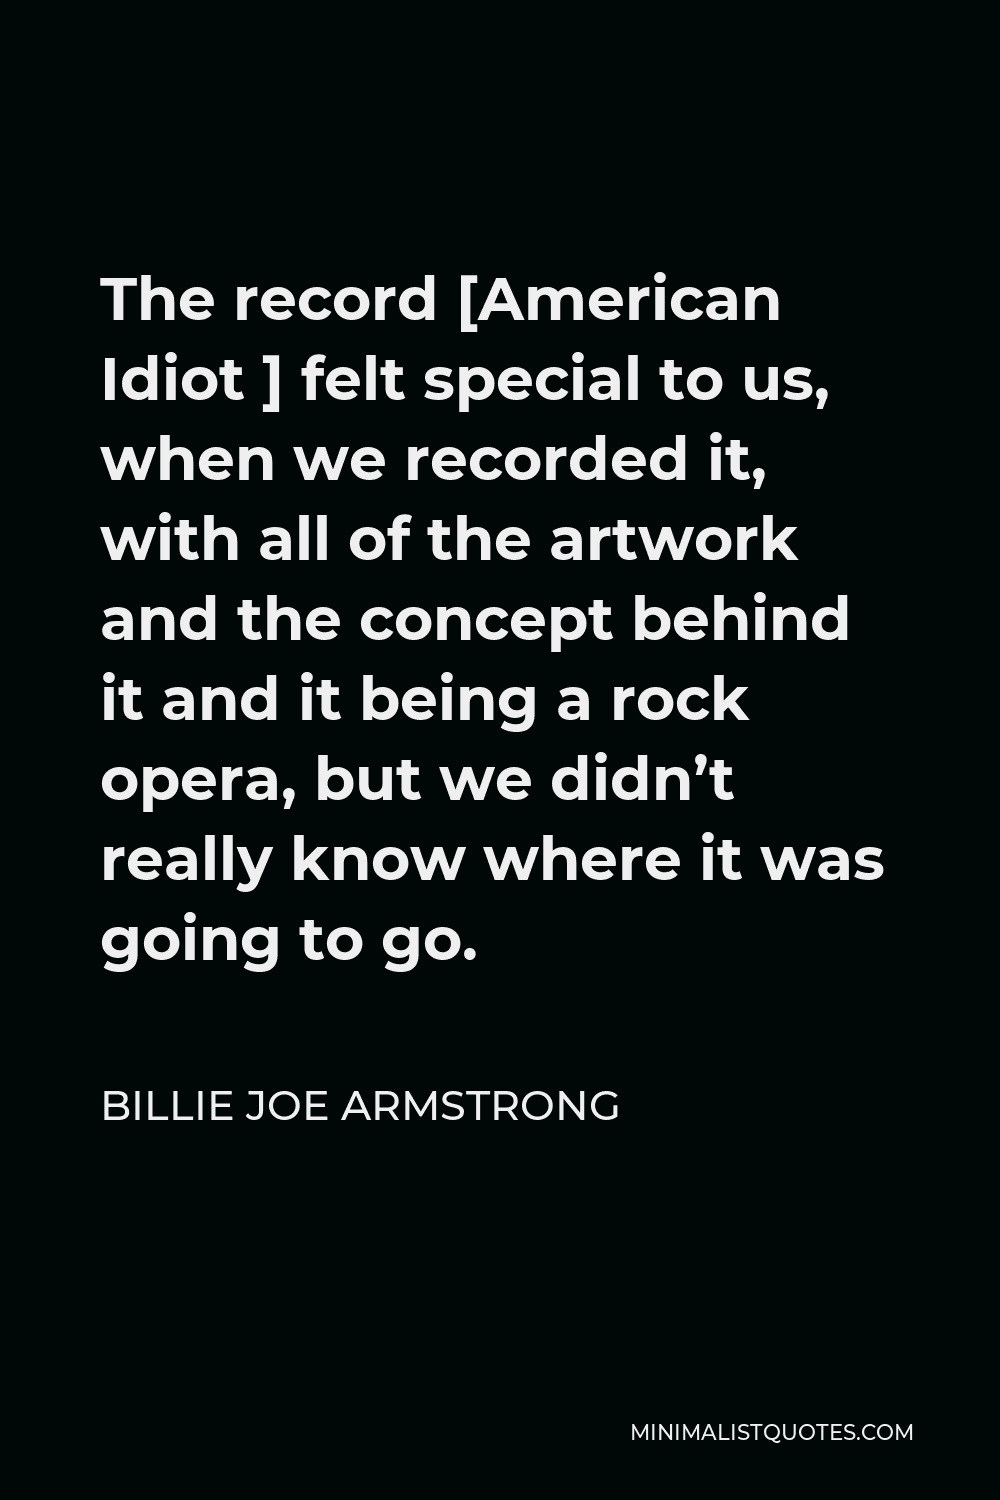 Billie Joe Armstrong Quote - The record [American Idiot ] felt special to us, when we recorded it, with all of the artwork and the concept behind it and it being a rock opera, but we didn’t really know where it was going to go.